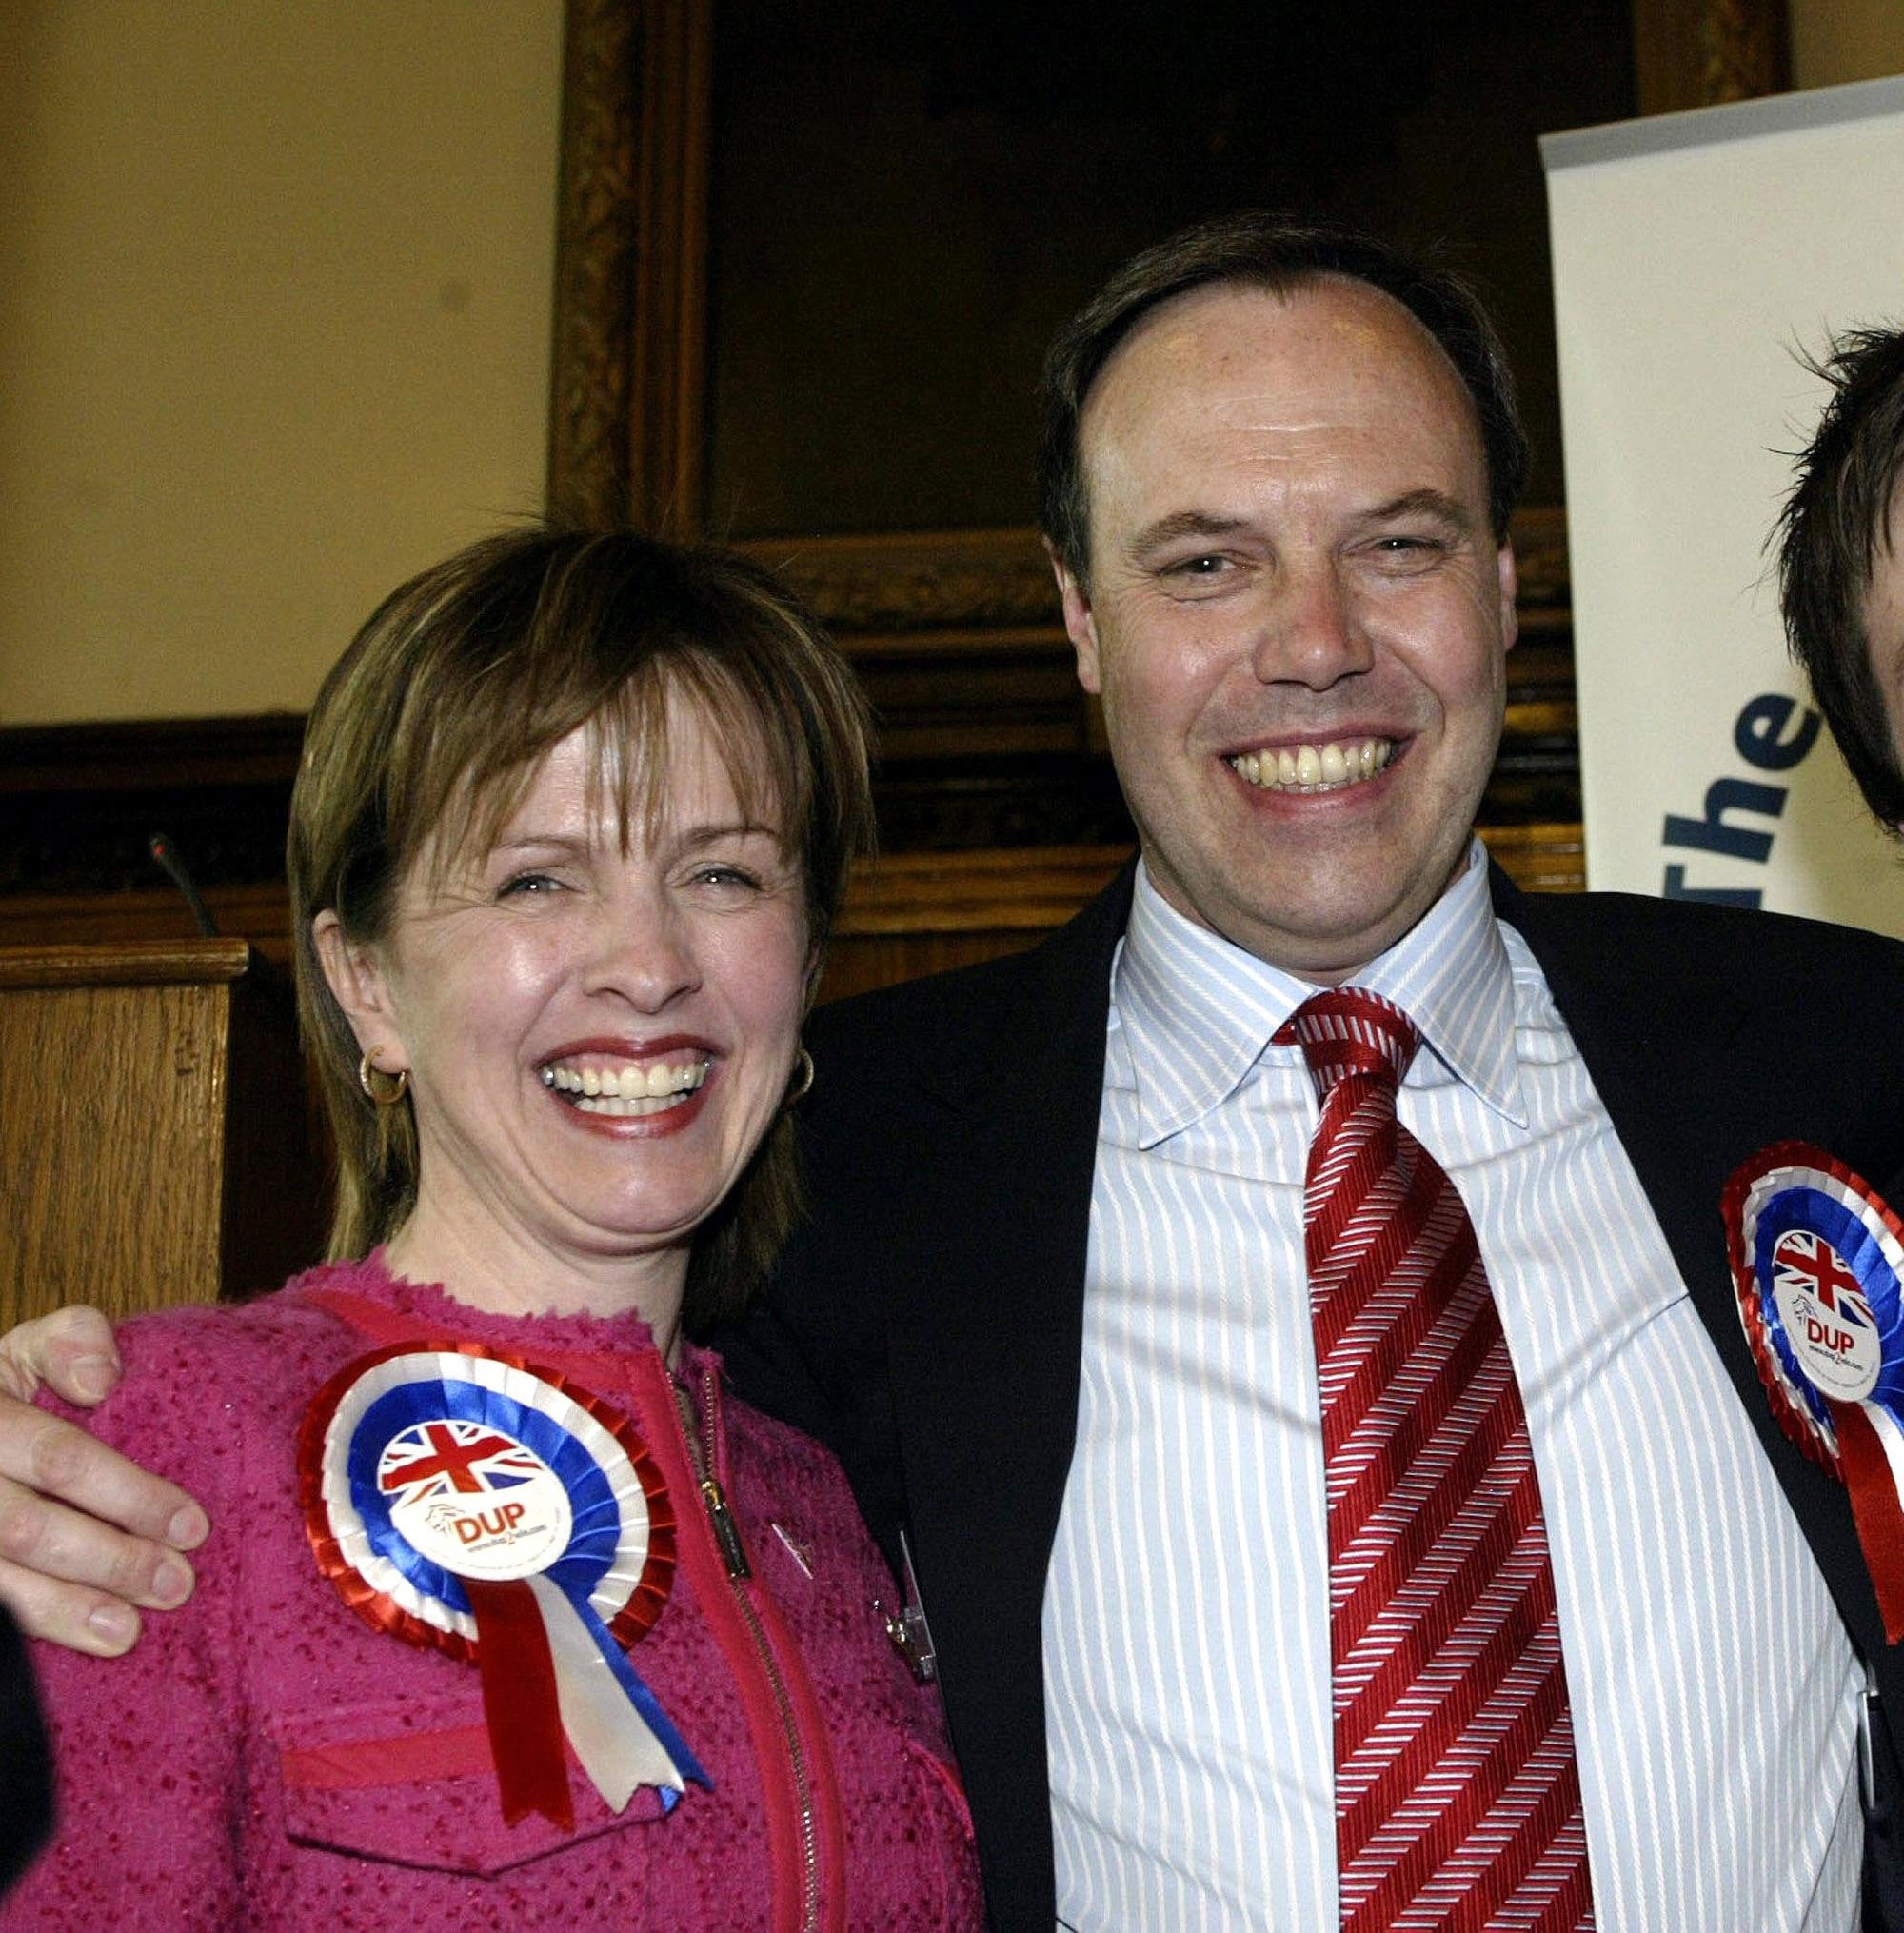 Former DUP MP Nigel Dodds with wife Diane (Paul Faith/PA)